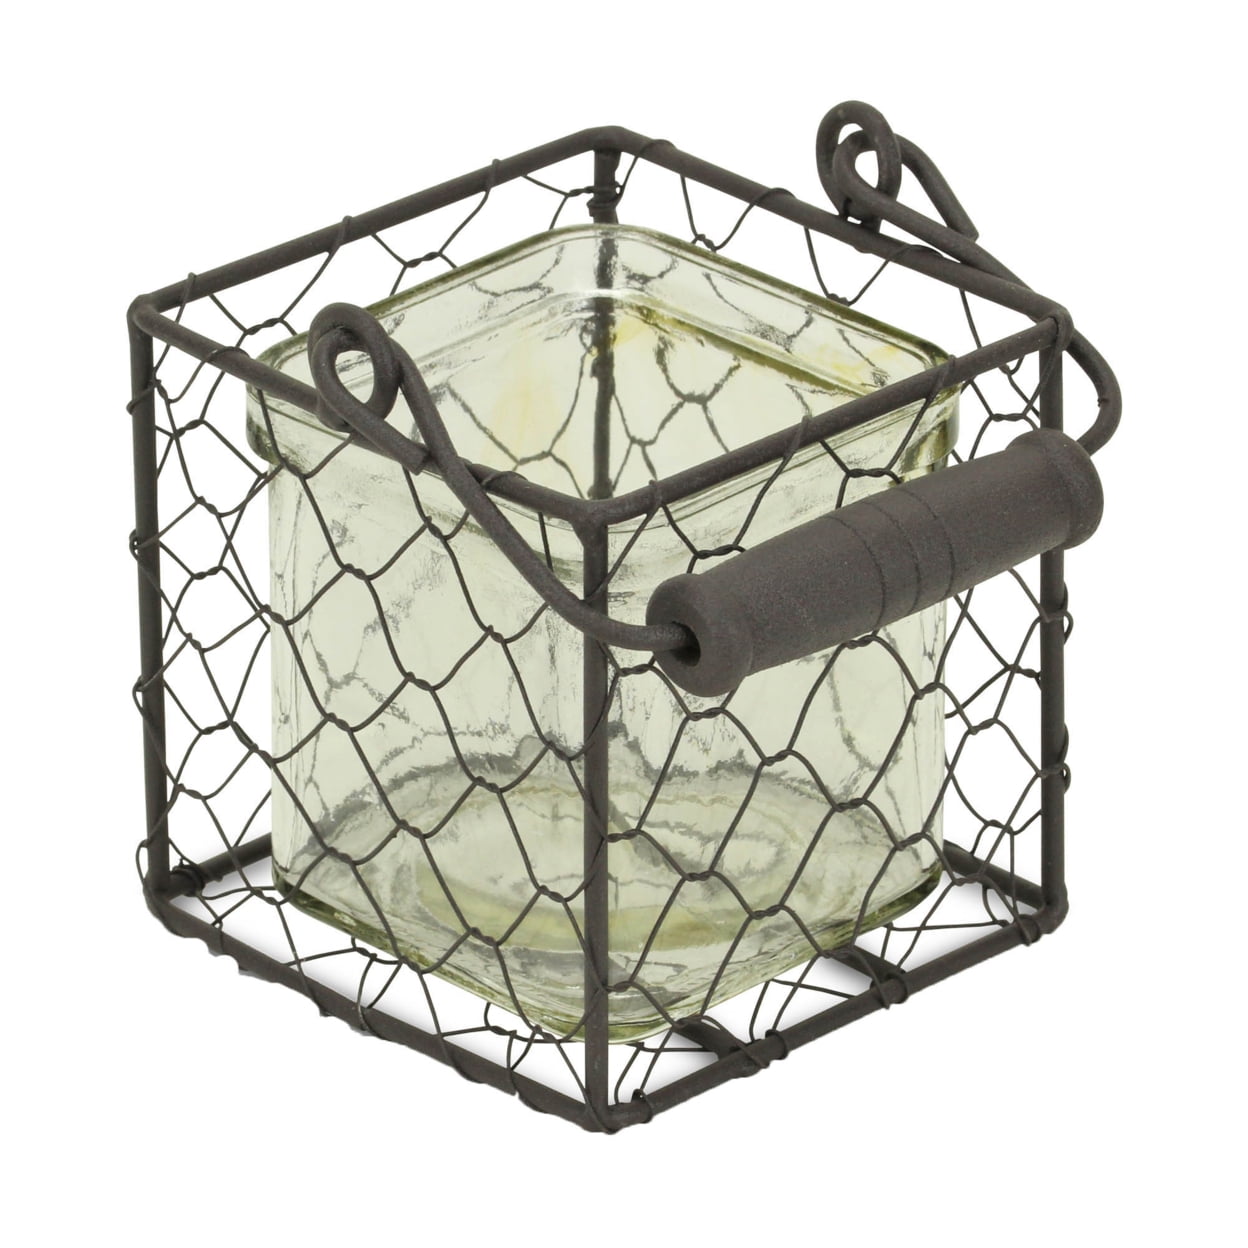 15s002brs Square Glass Jar In Wire Basket, Brown - Small